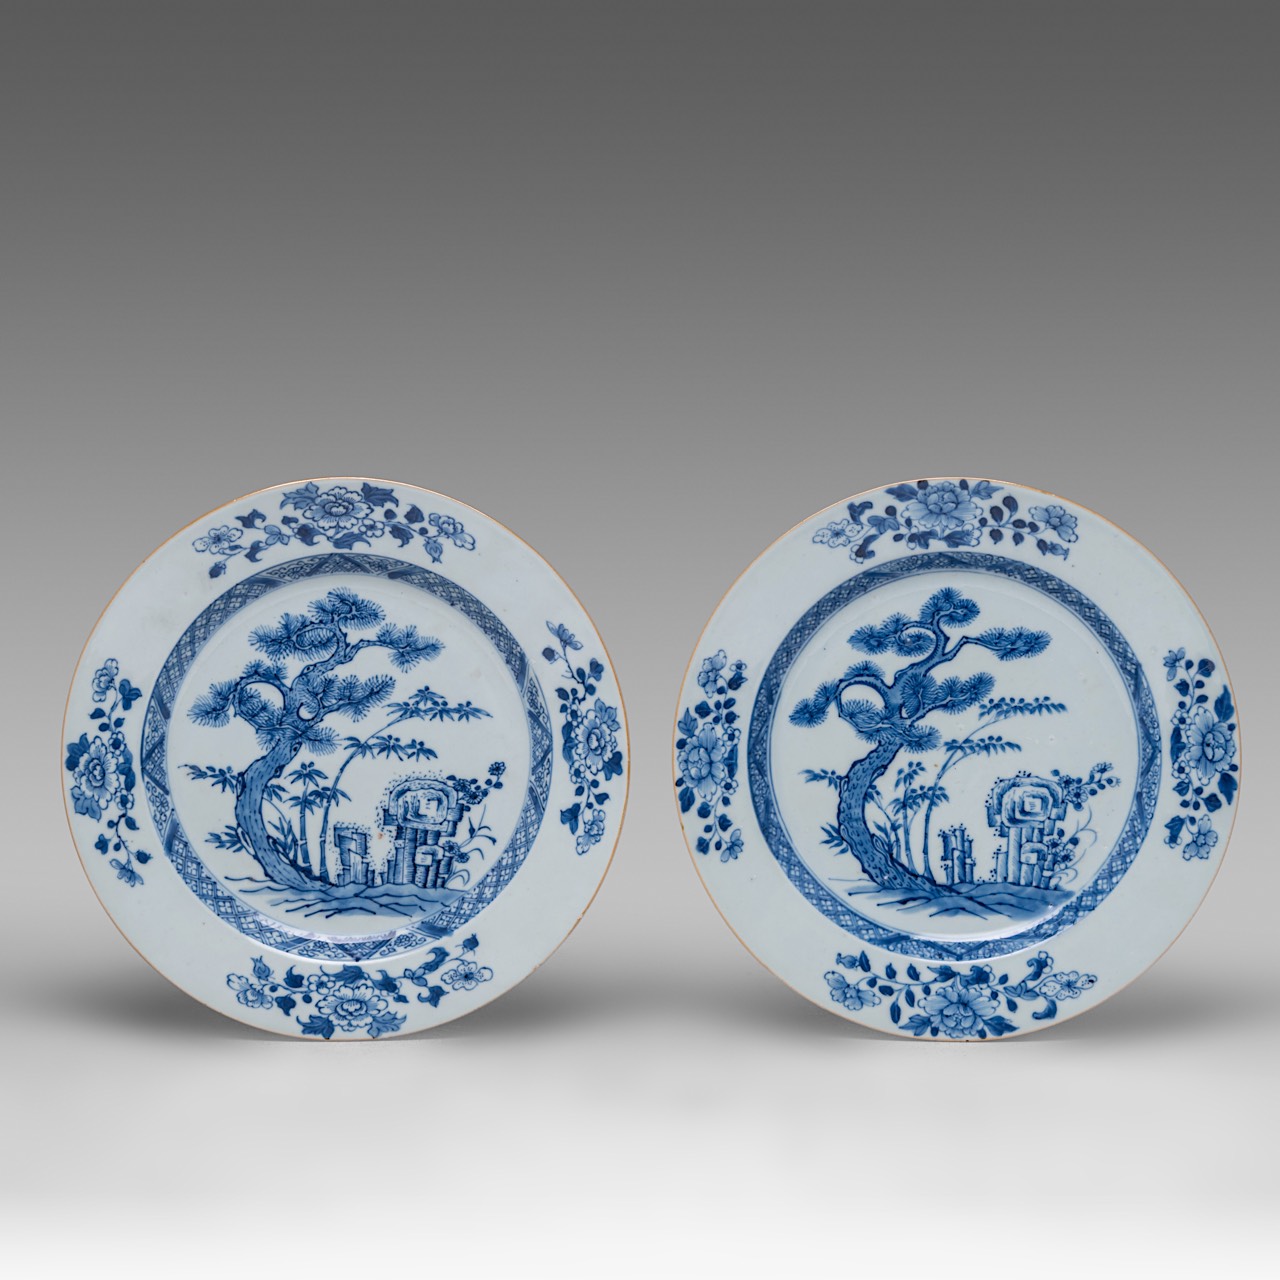 A series of four Chinese blue and white 'Bamboo below Pine' dishes and plates, 18thC, dia 22,5 - 28, - Image 10 of 12